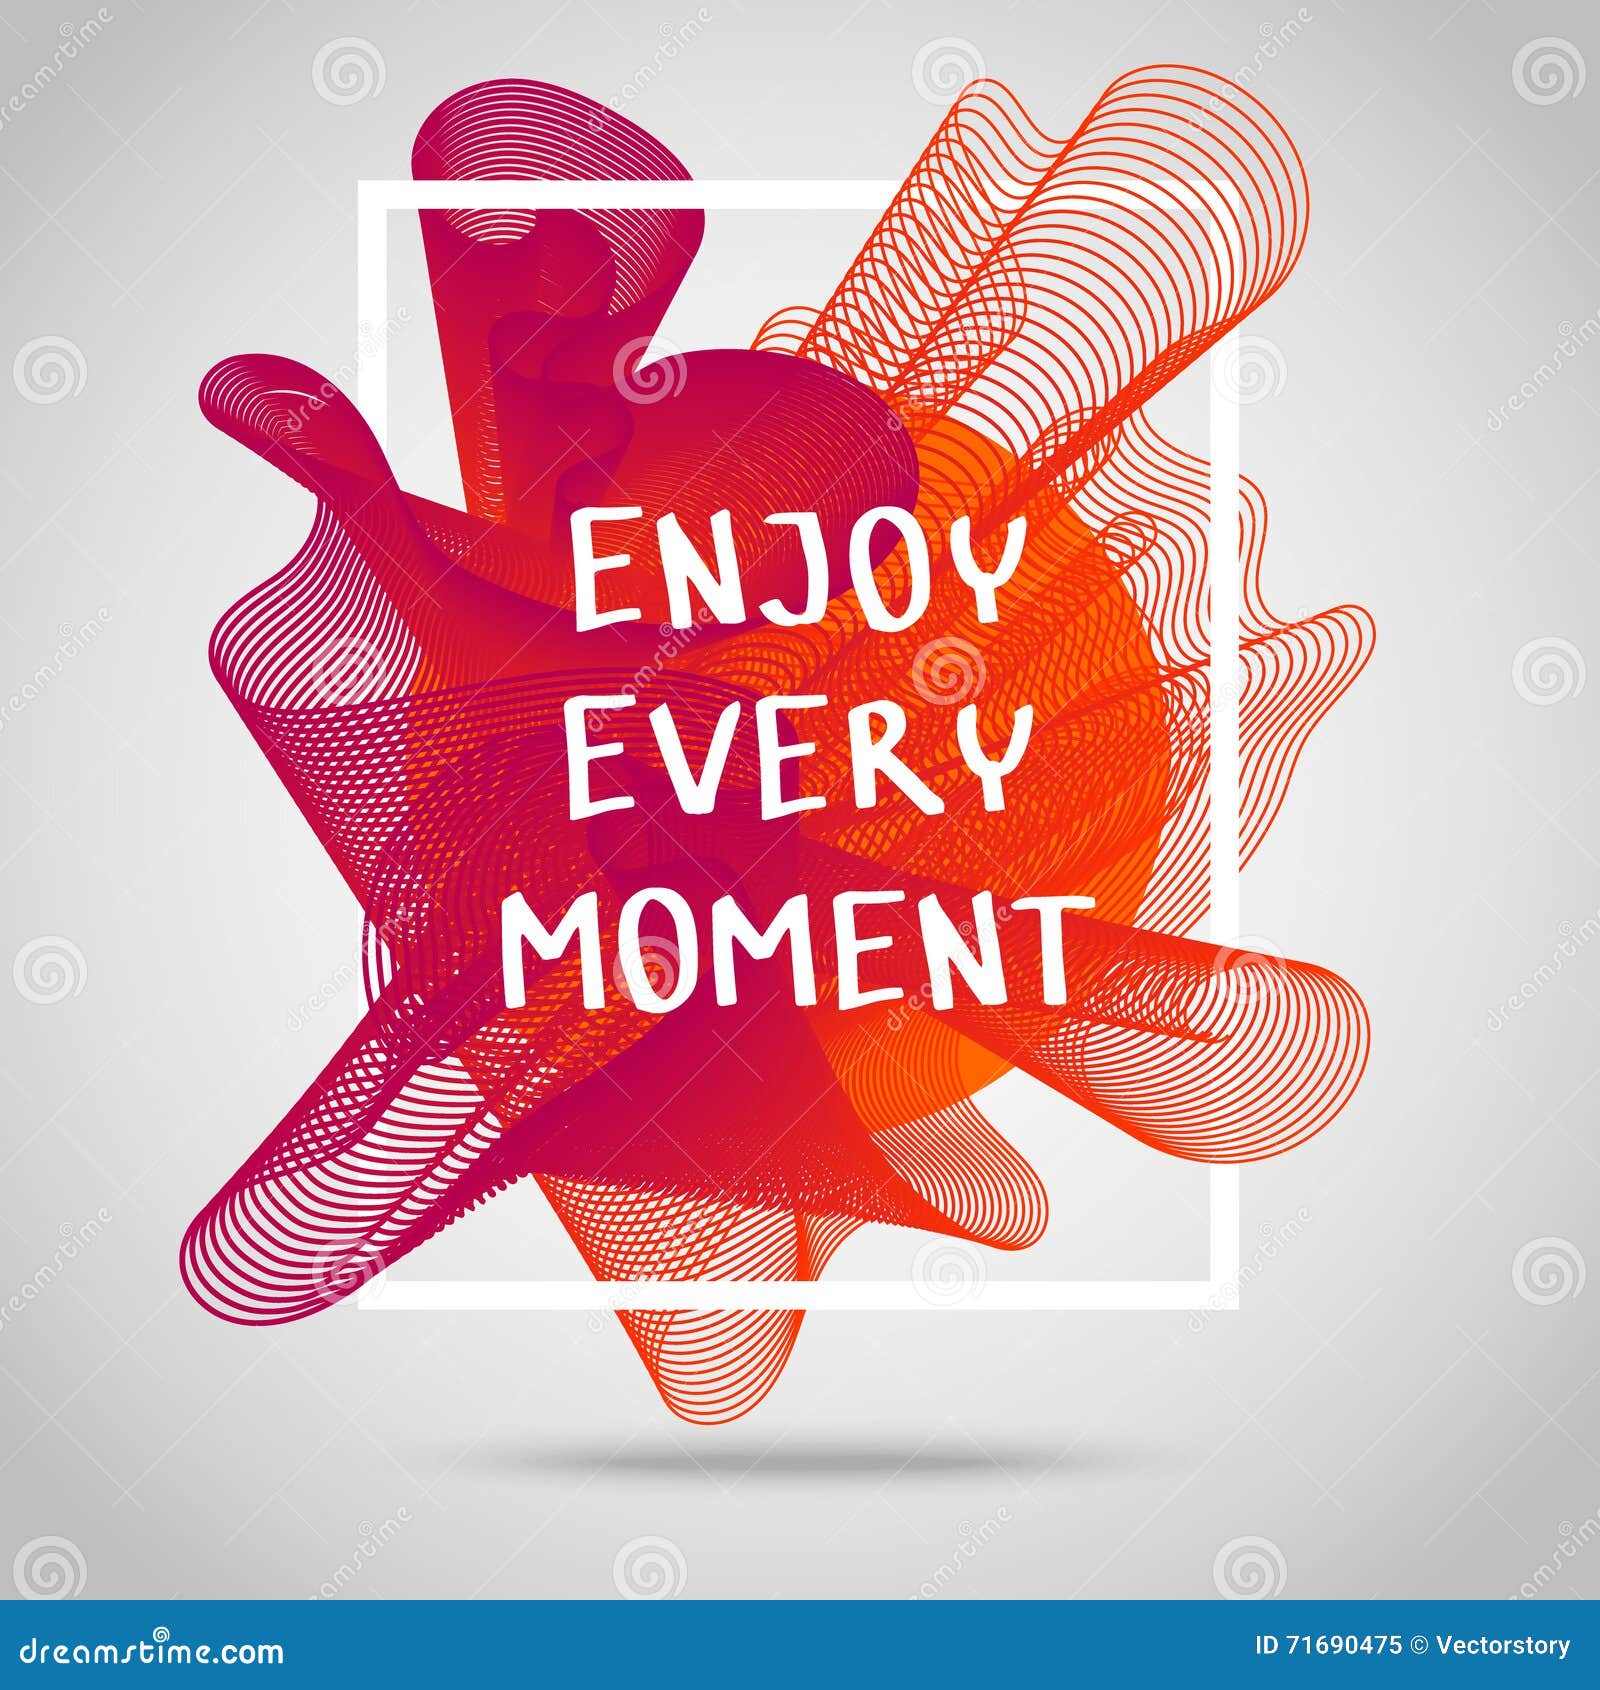 Enjoy Every Moment. Inspirational Quote. Stock Vector - Illustration of ...